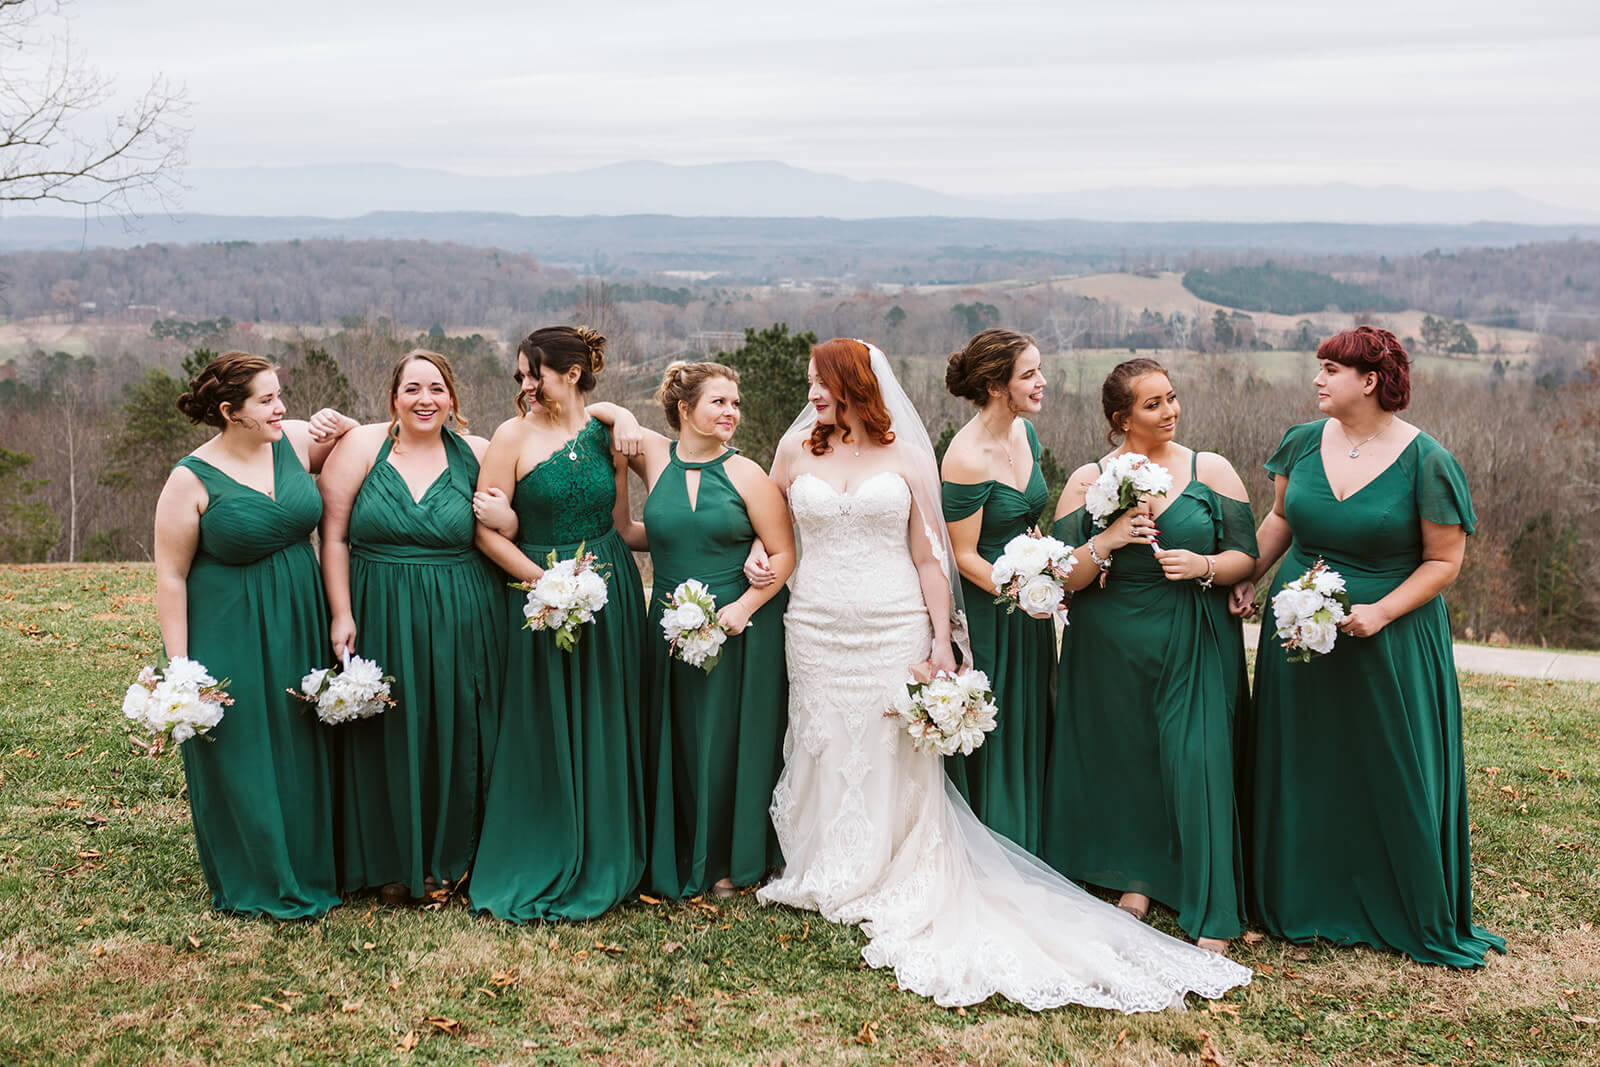 A bride poses with her bridesmaids, who are dressed in emerald green, in front of the hills at a mountain wedding venue in Chattanooga, TN.